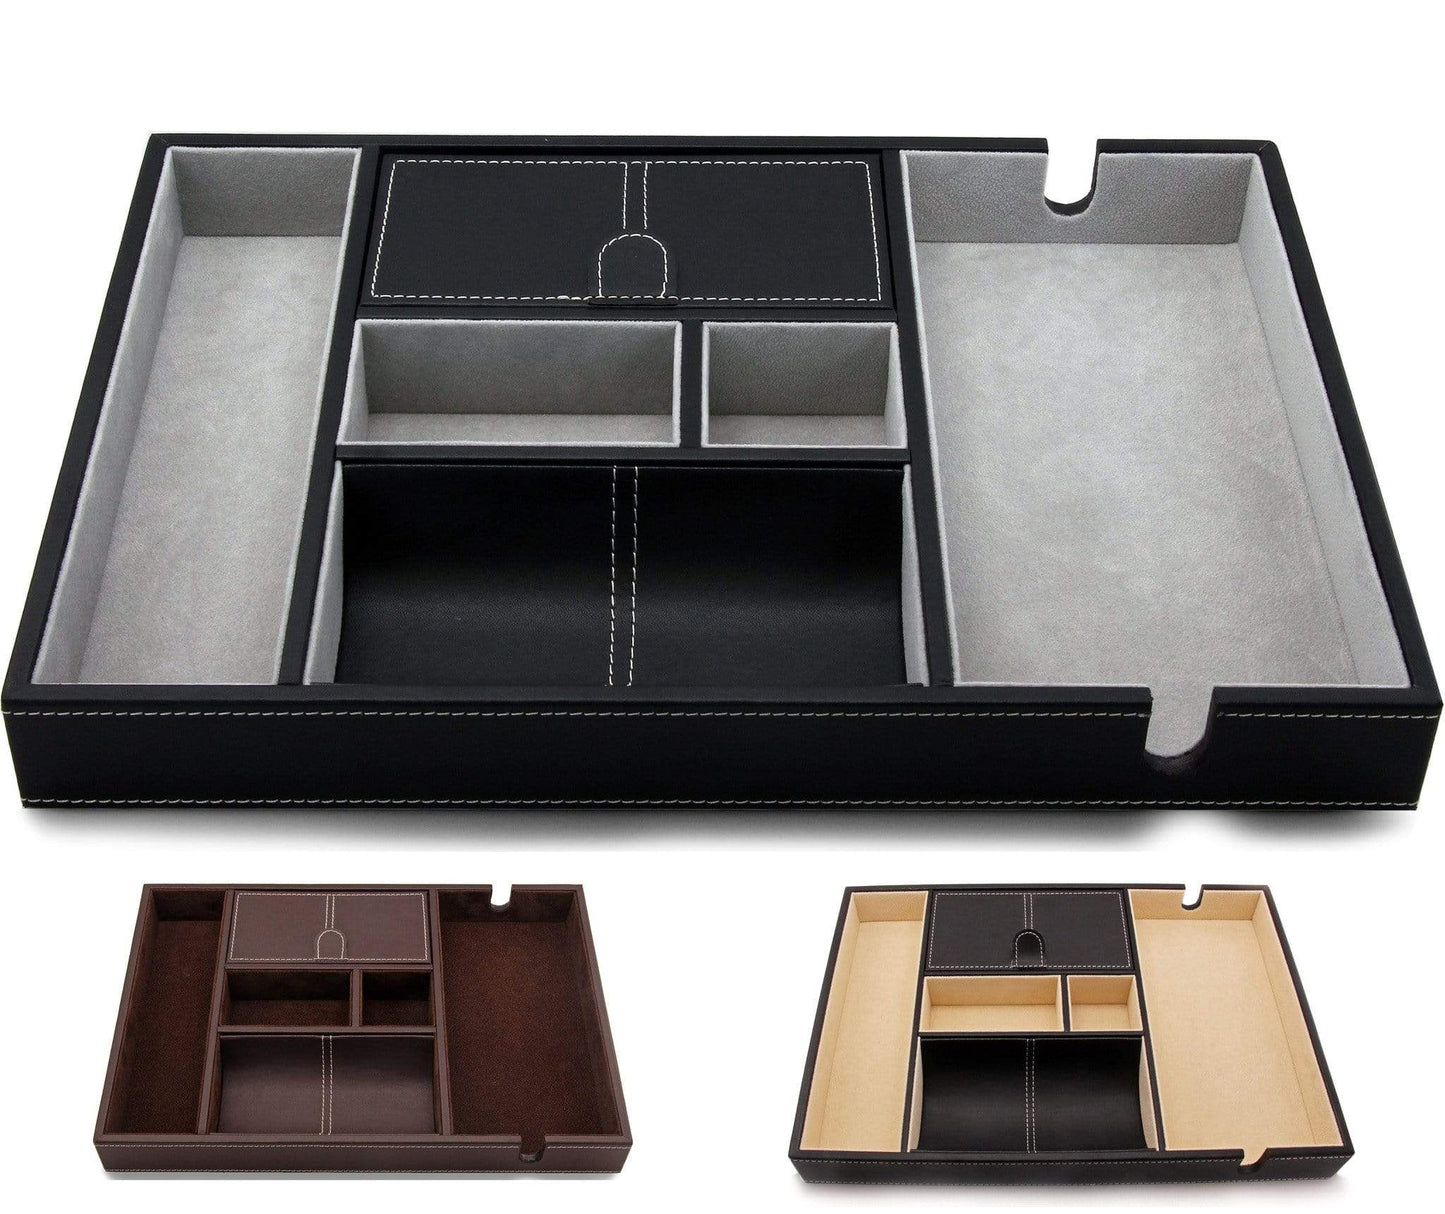 HOUNDSBAY Valet Organizer The Victory - Valet Tray for Men with Large Smartphone Charging Station